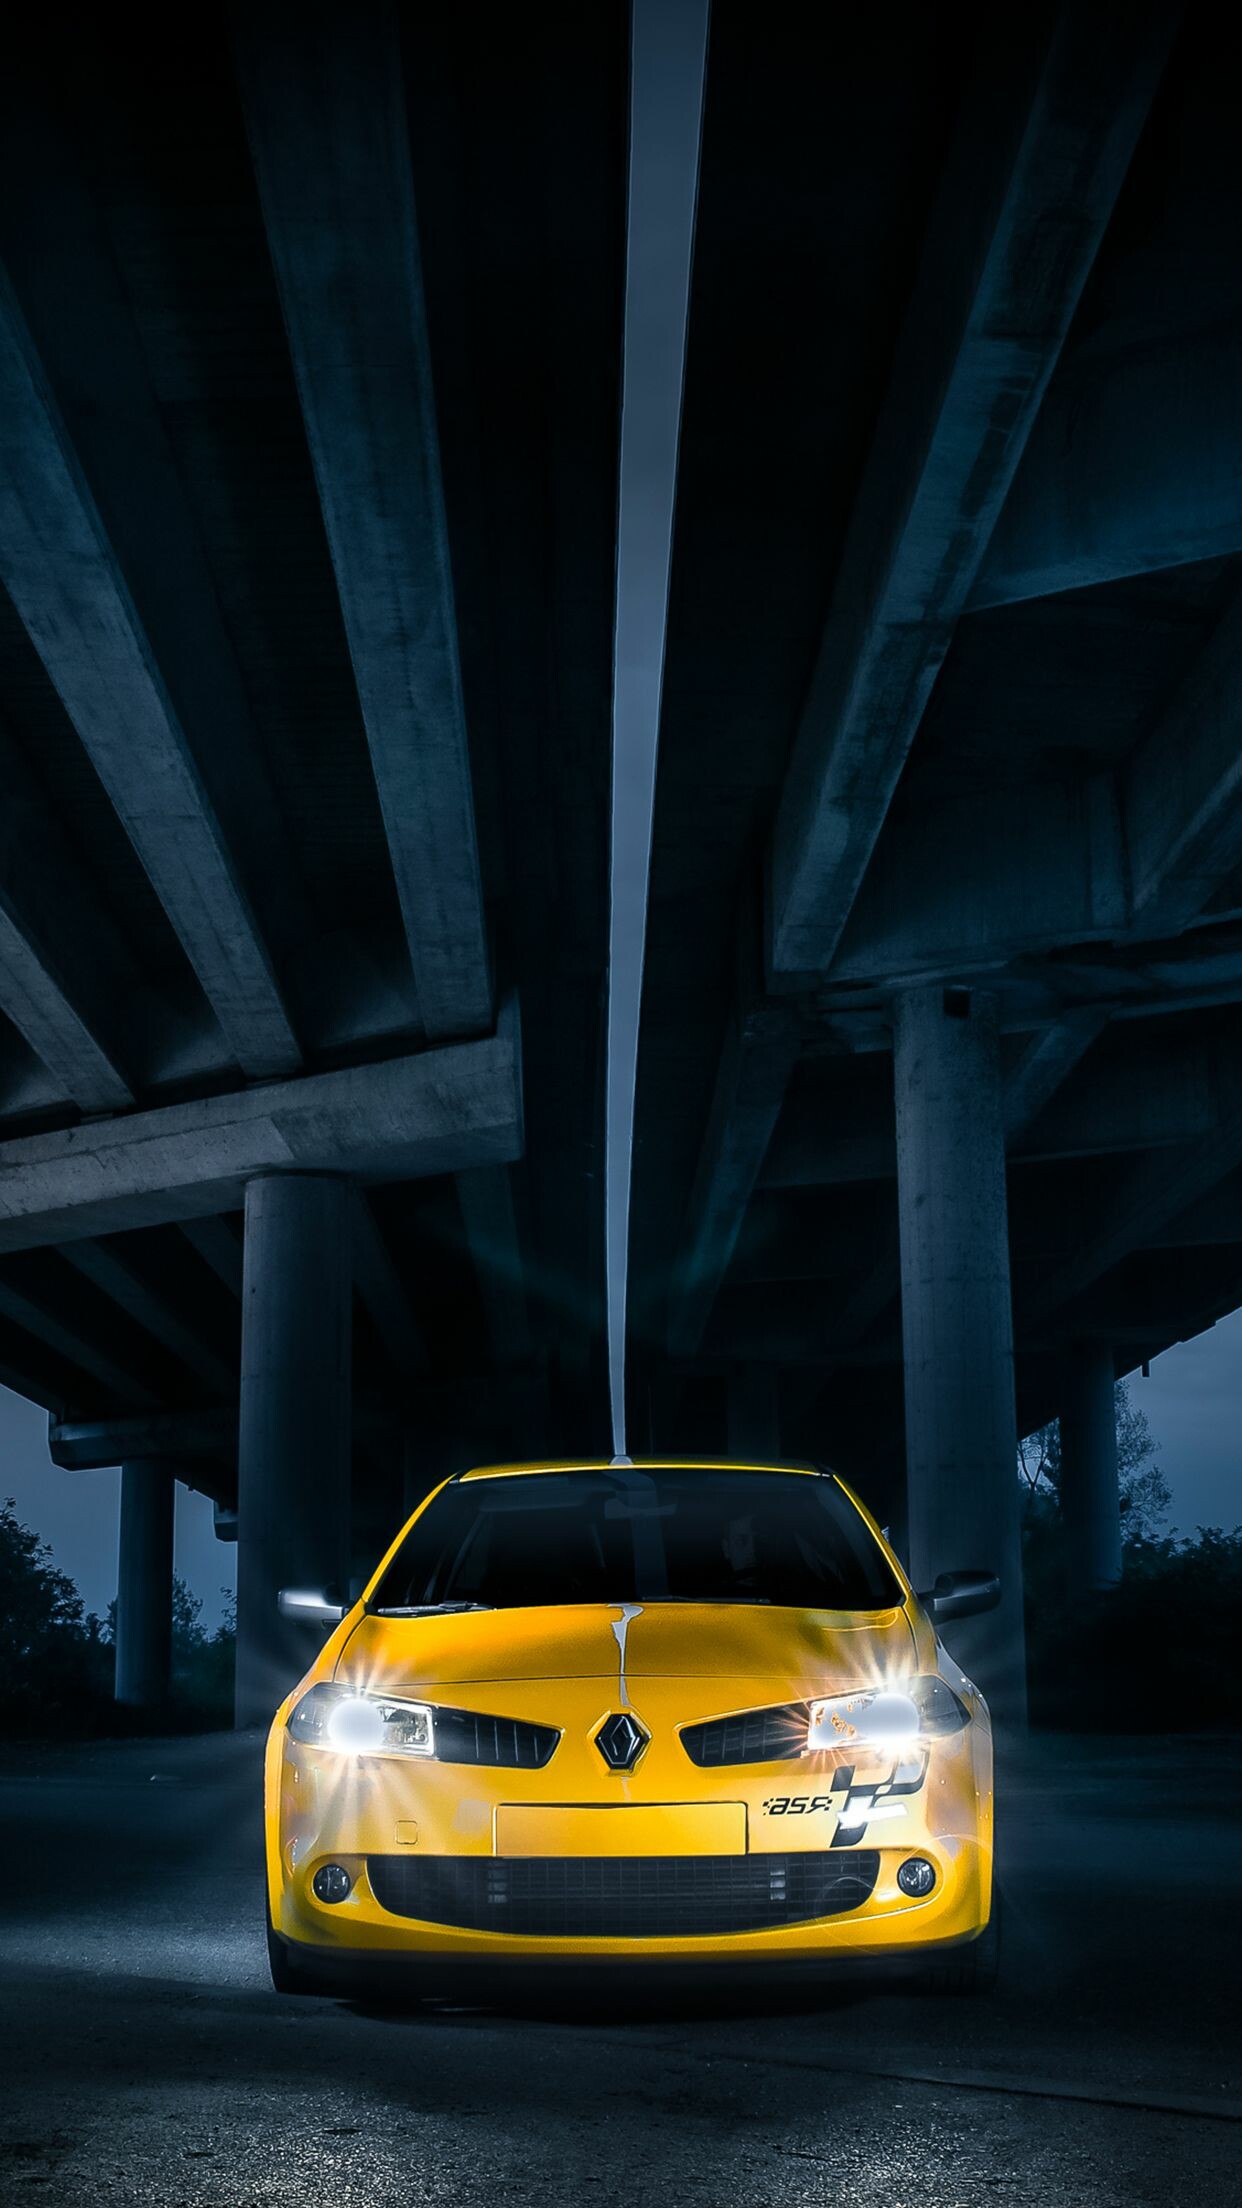 Renault: Megane 2 RS, Cars, Automobile industry. 1250x2210 HD Wallpaper.